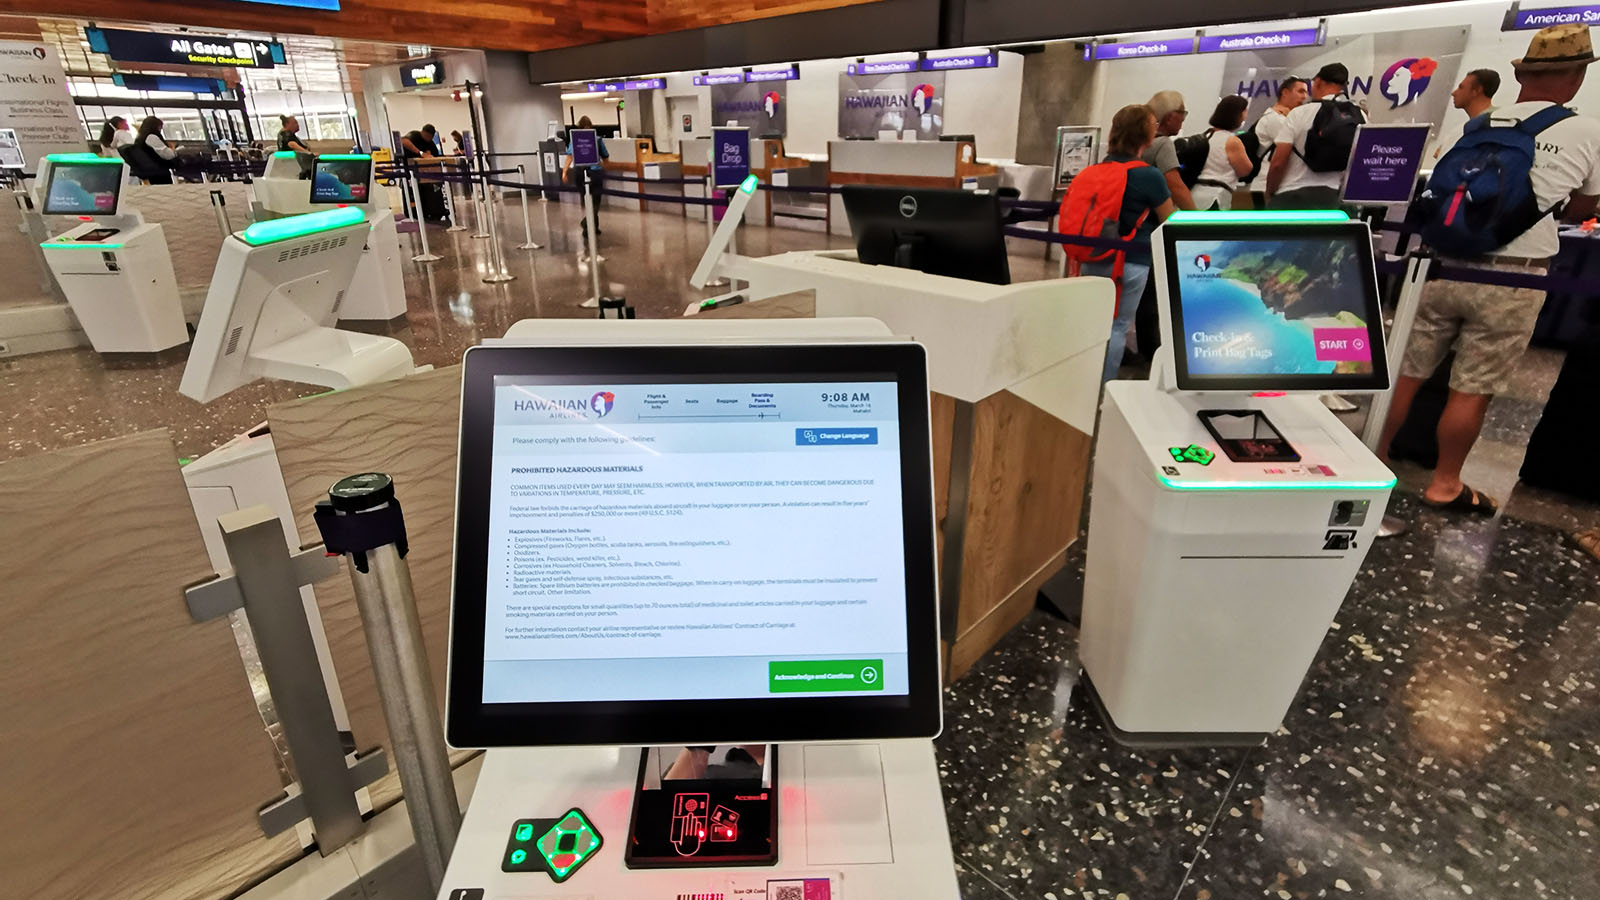 Automated check-in for Hawaiian Airlines